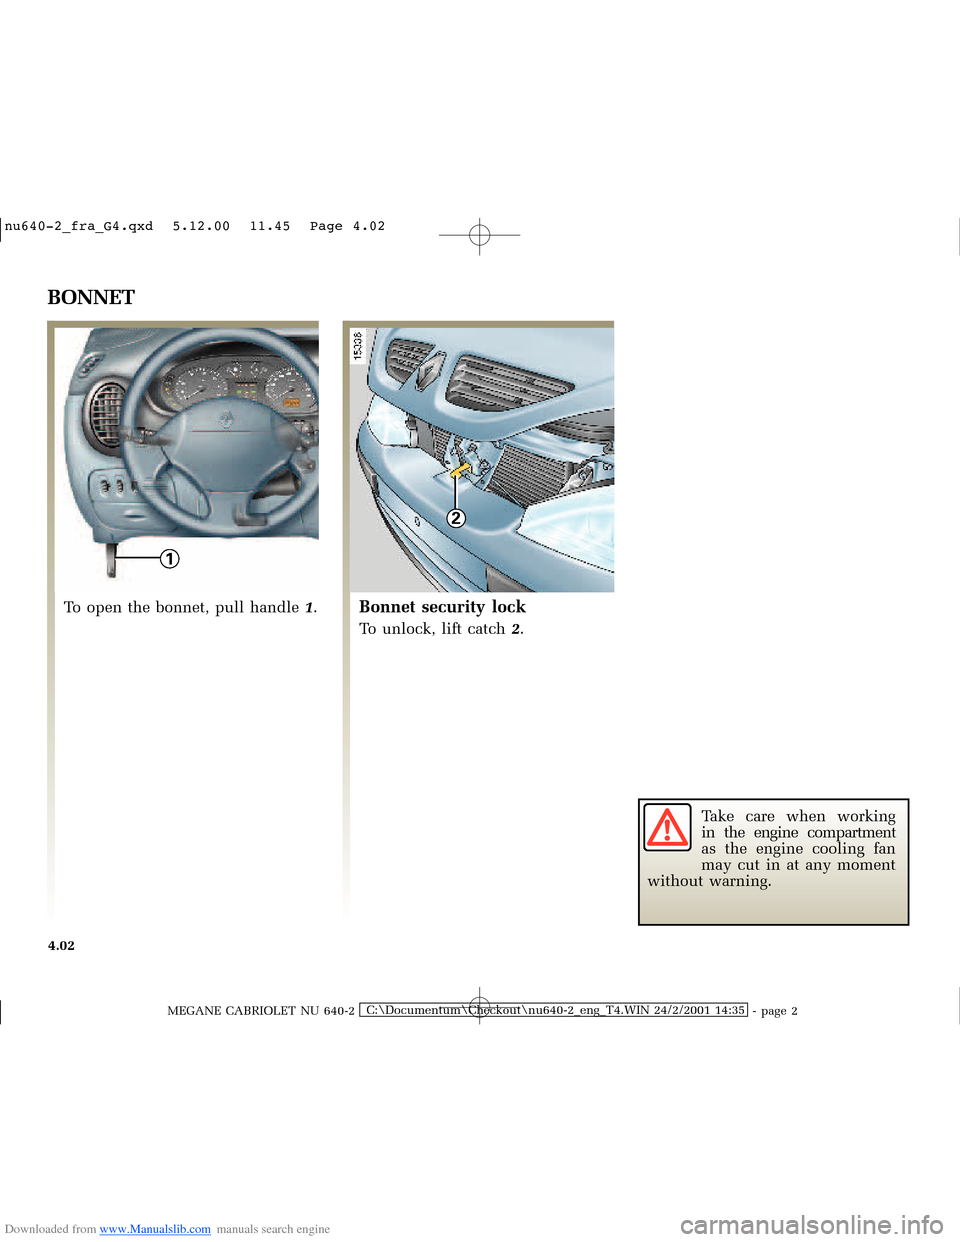 RENAULT MEGANE 2000 X64 / 1.G Owners Manual Downloaded from www.Manualslib.com manuals search engine 1
2
�Q�X������B�I�U�D�B�*���T�[�G� � �������� � ������ � �3�D�J�H� ����
MEGANE CABRIOLET NU 640-2C:\Documentum\Ch